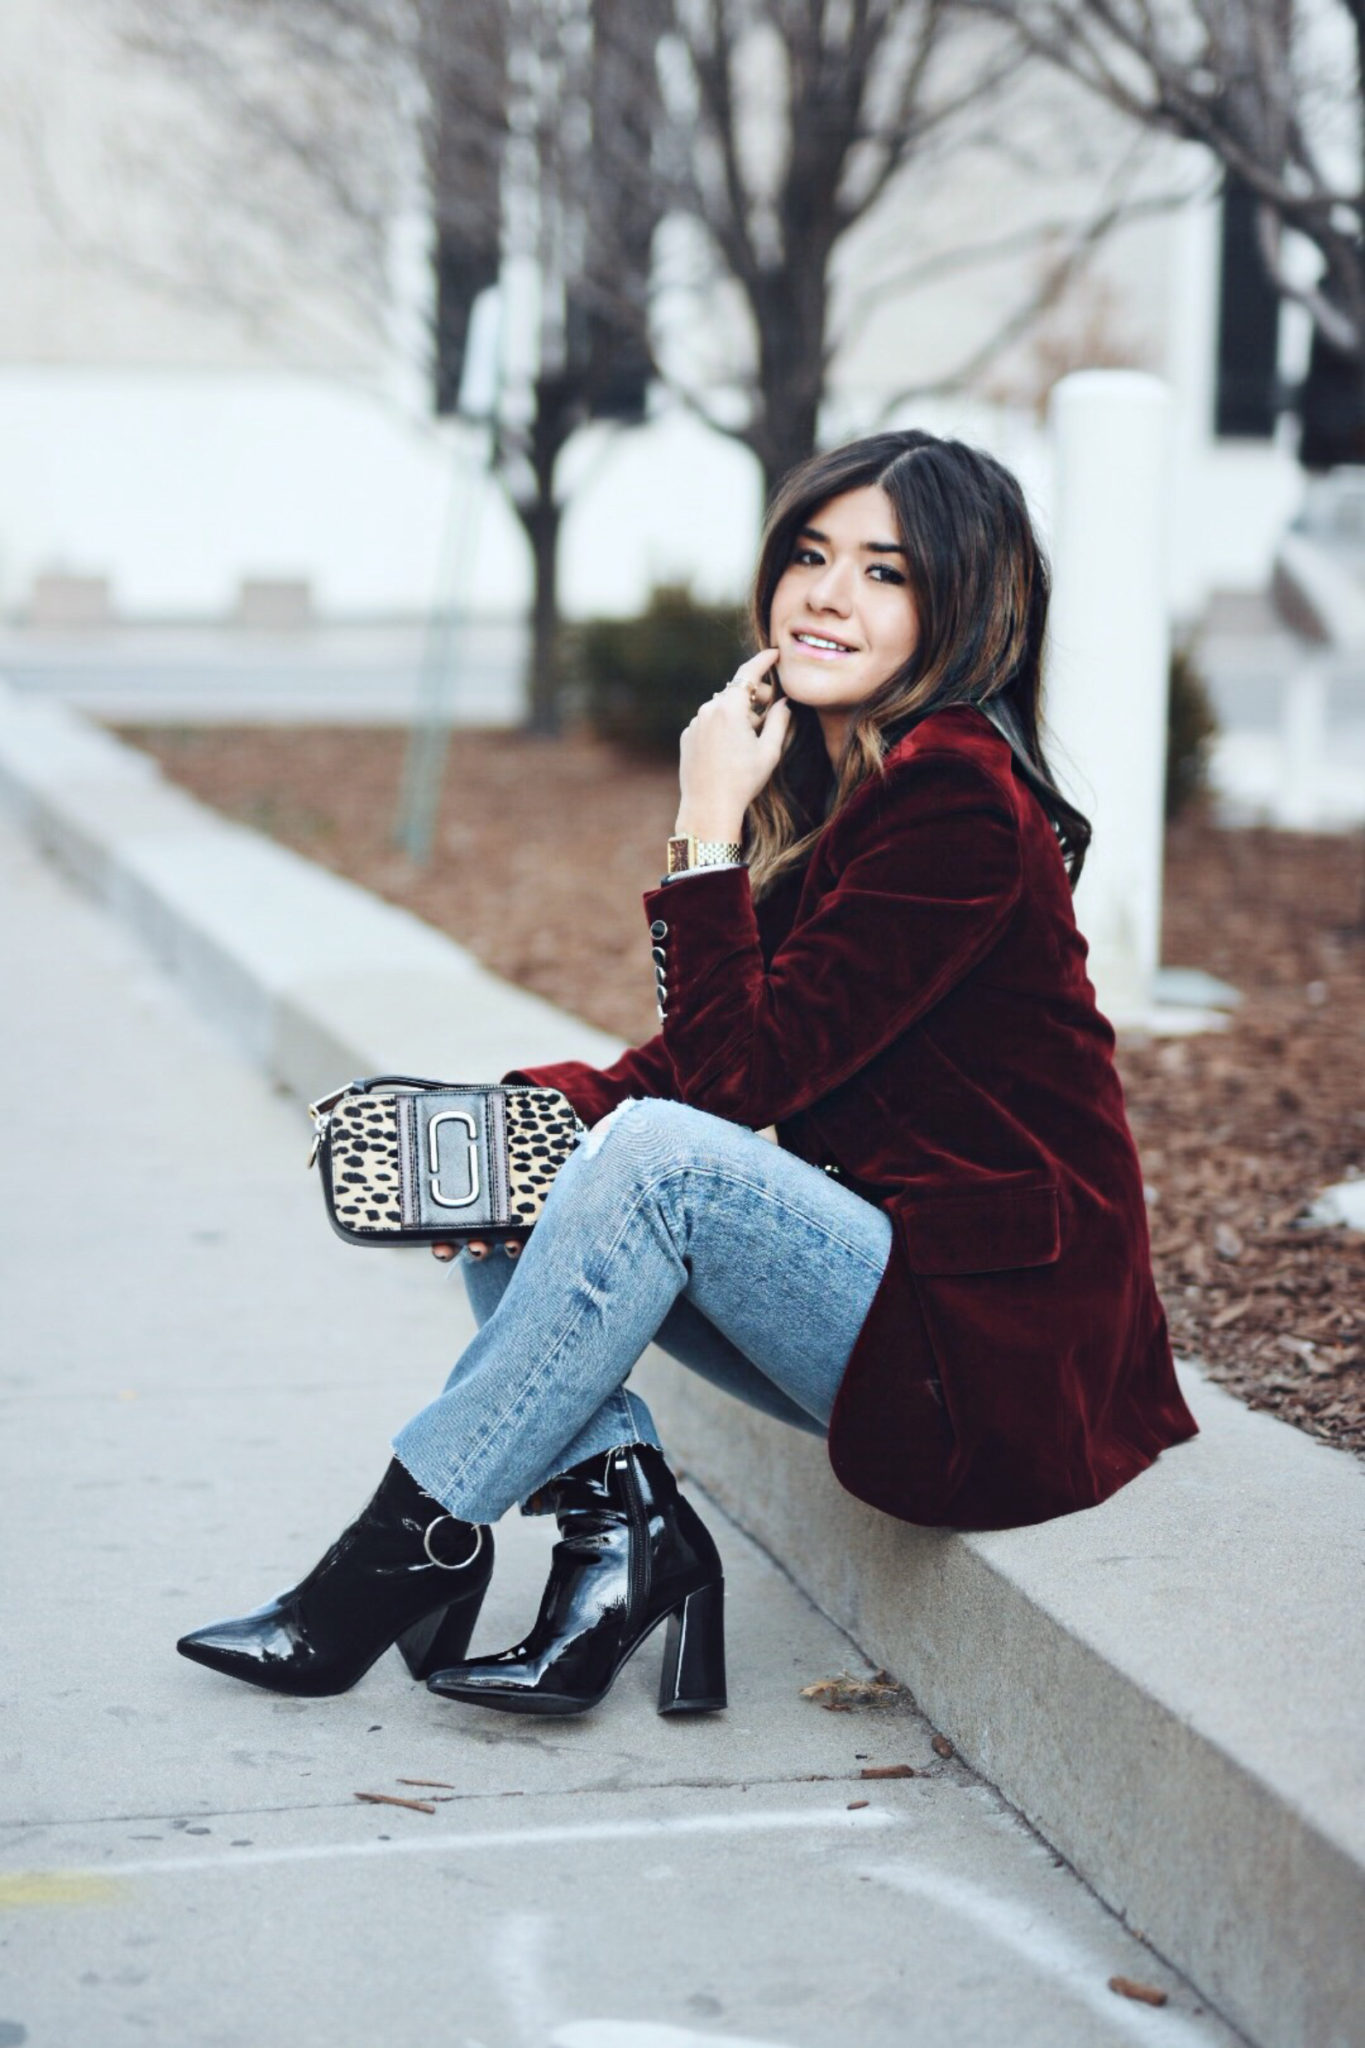 carolina hellal of chic talk wearing a chicwish velvet blazer, marc jacobs bag, levis jeans and ego shoes boots